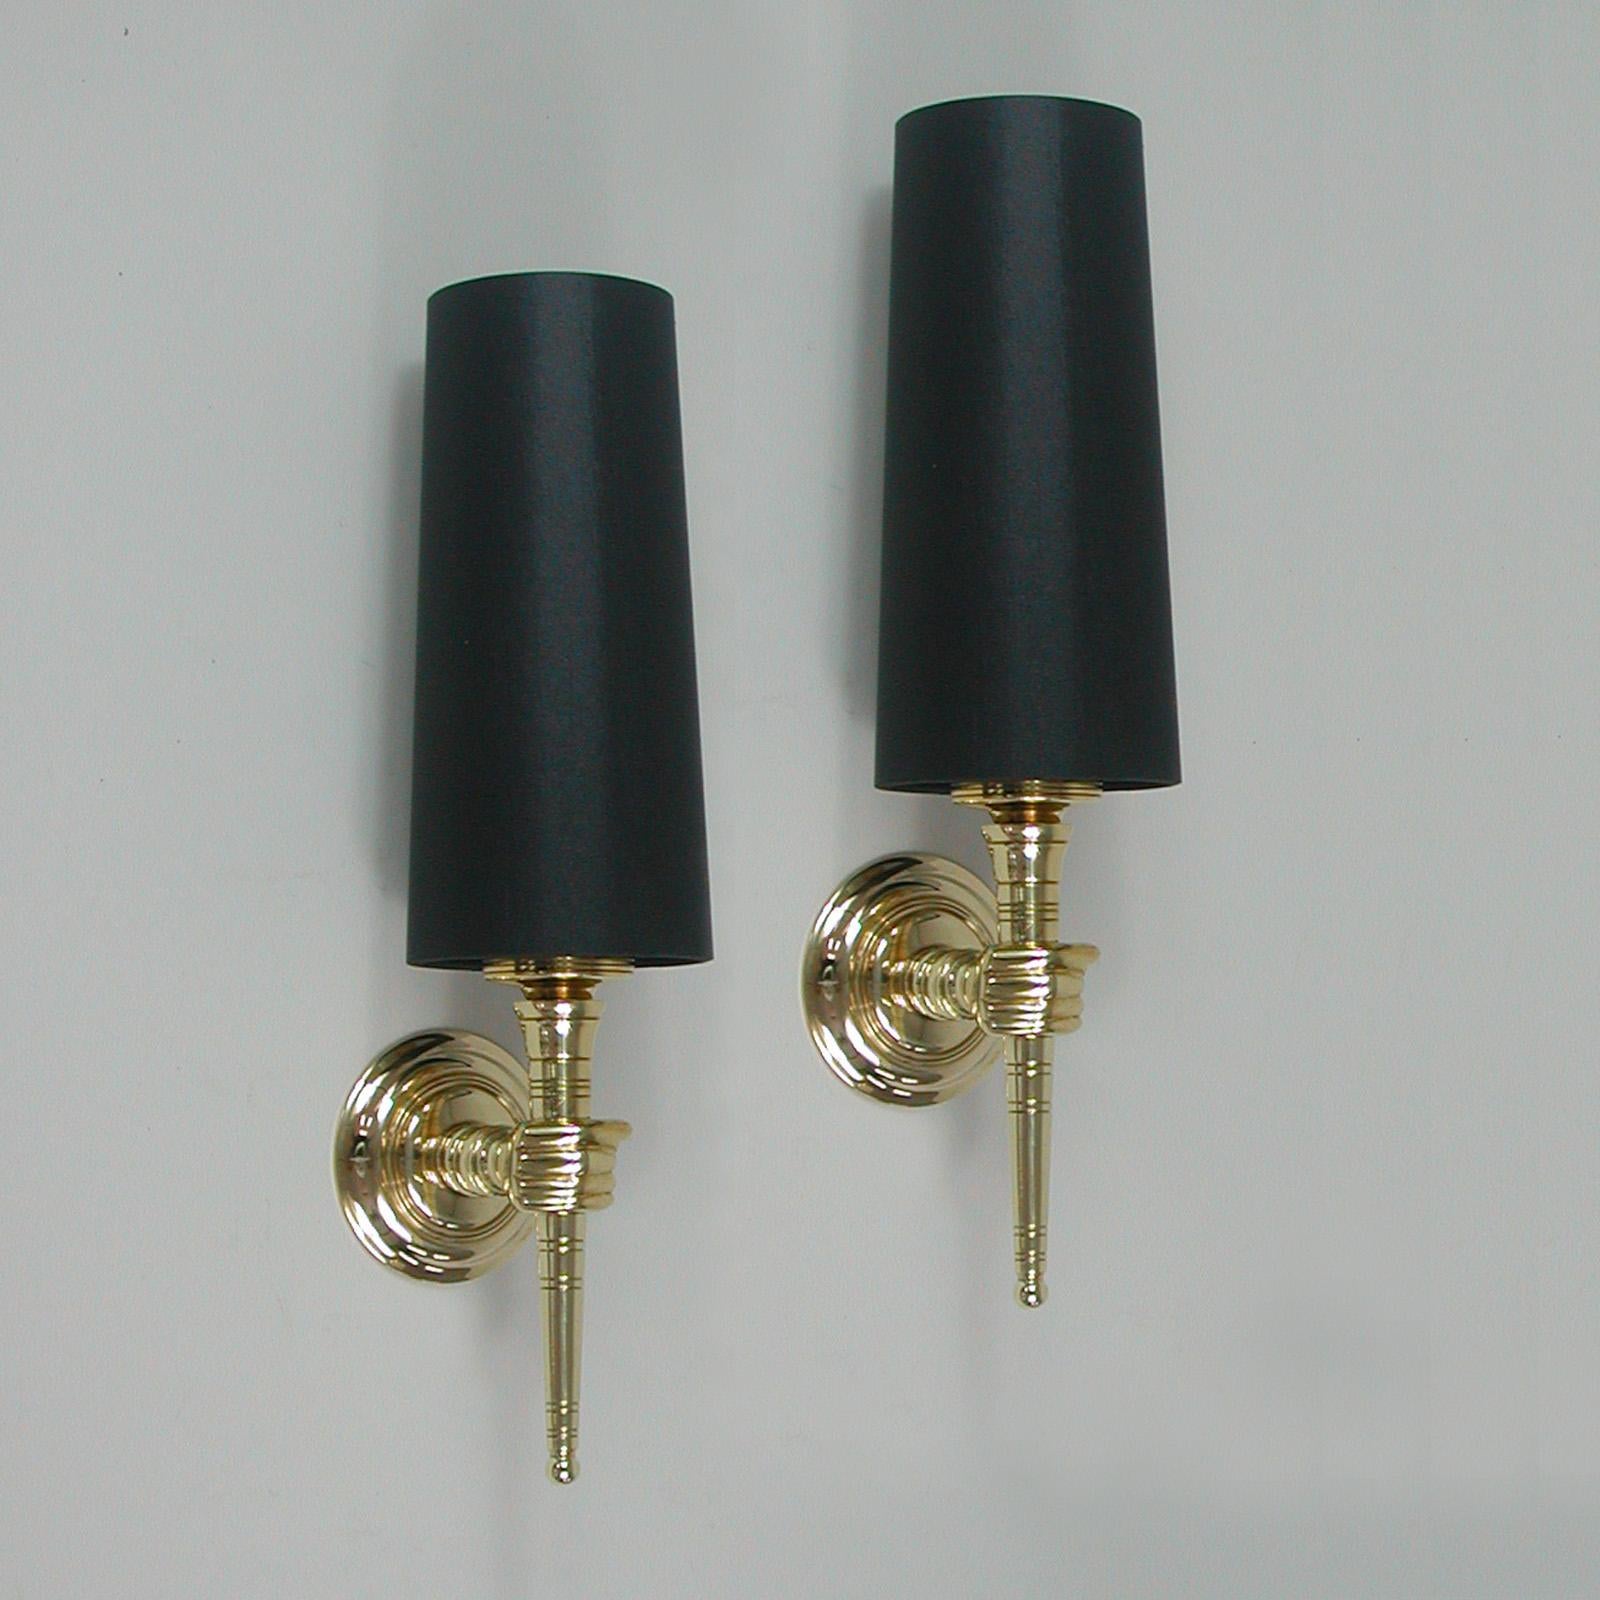 These unusual vintage sconces were designed and manufactured in France in the 1950s. They feature brass torchiere lights with (new) hand made black cotton fabric lamp shades.

Wired for use in US, Europe and Asia the lights require one E14 bulb up